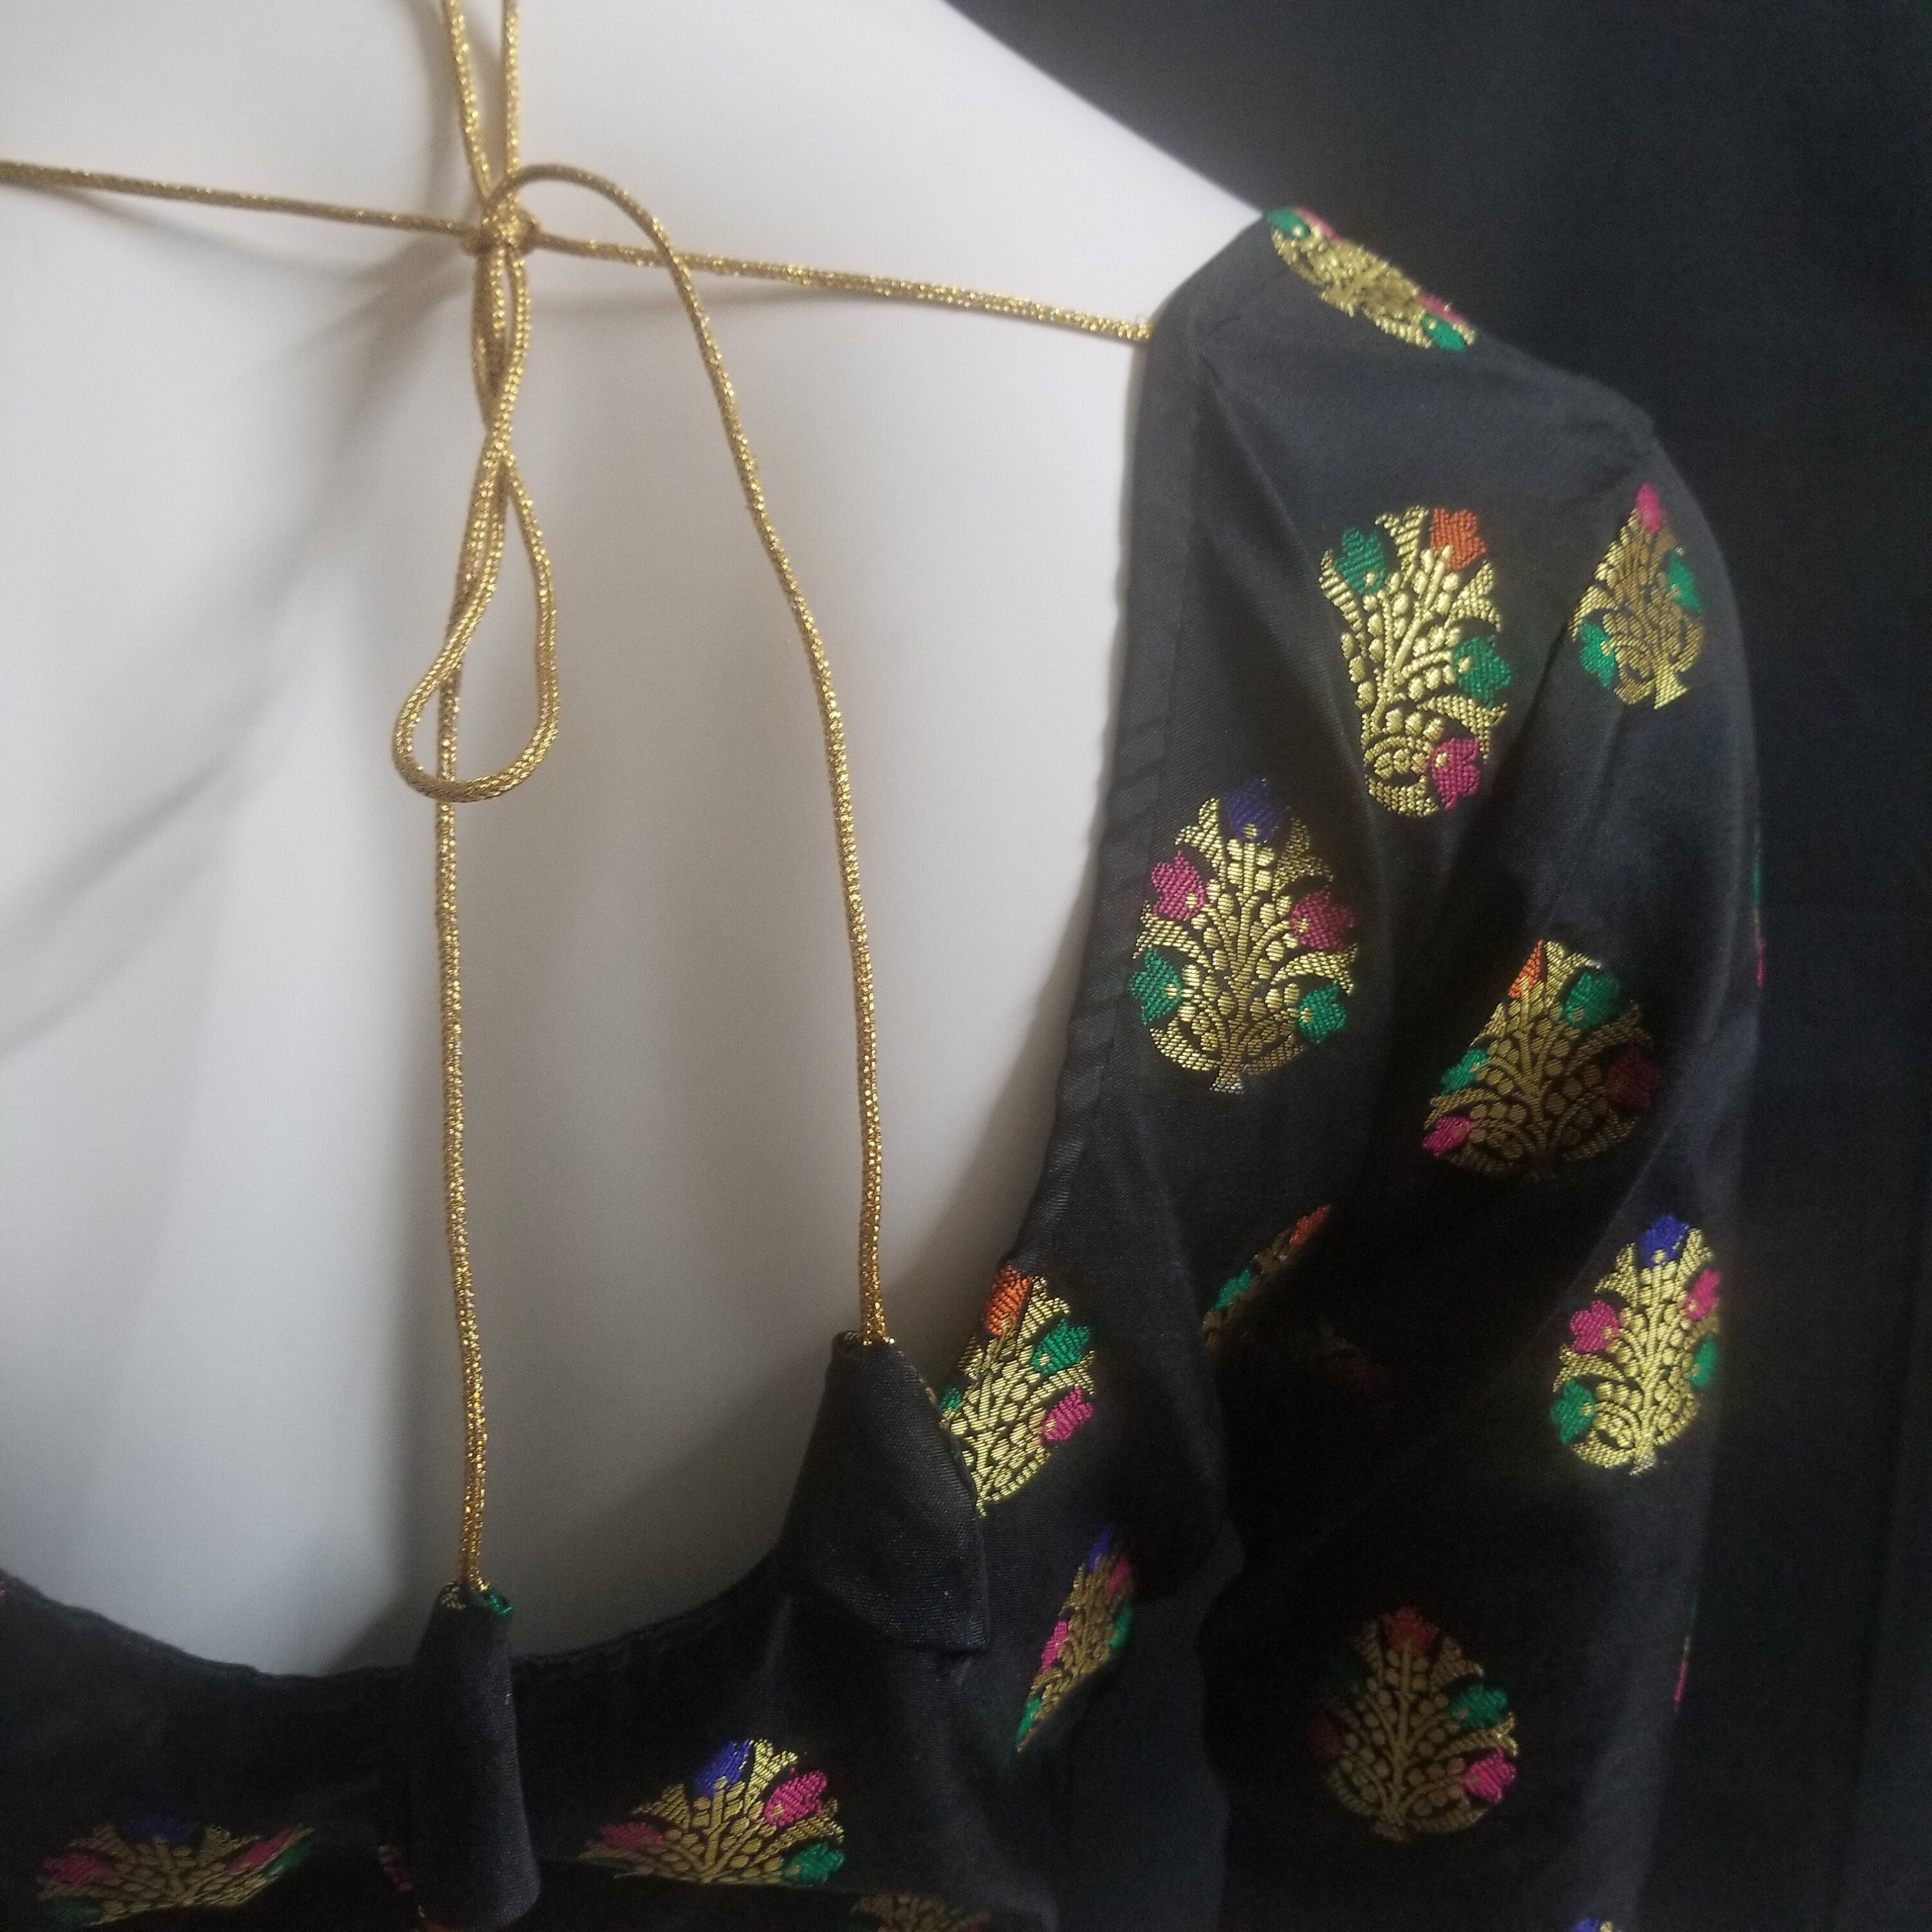 Readymade Saree Blouse - Black Silk gold and multi-color flower - Plus size - Princess cut padded - size 42" (alter 38" to 46")